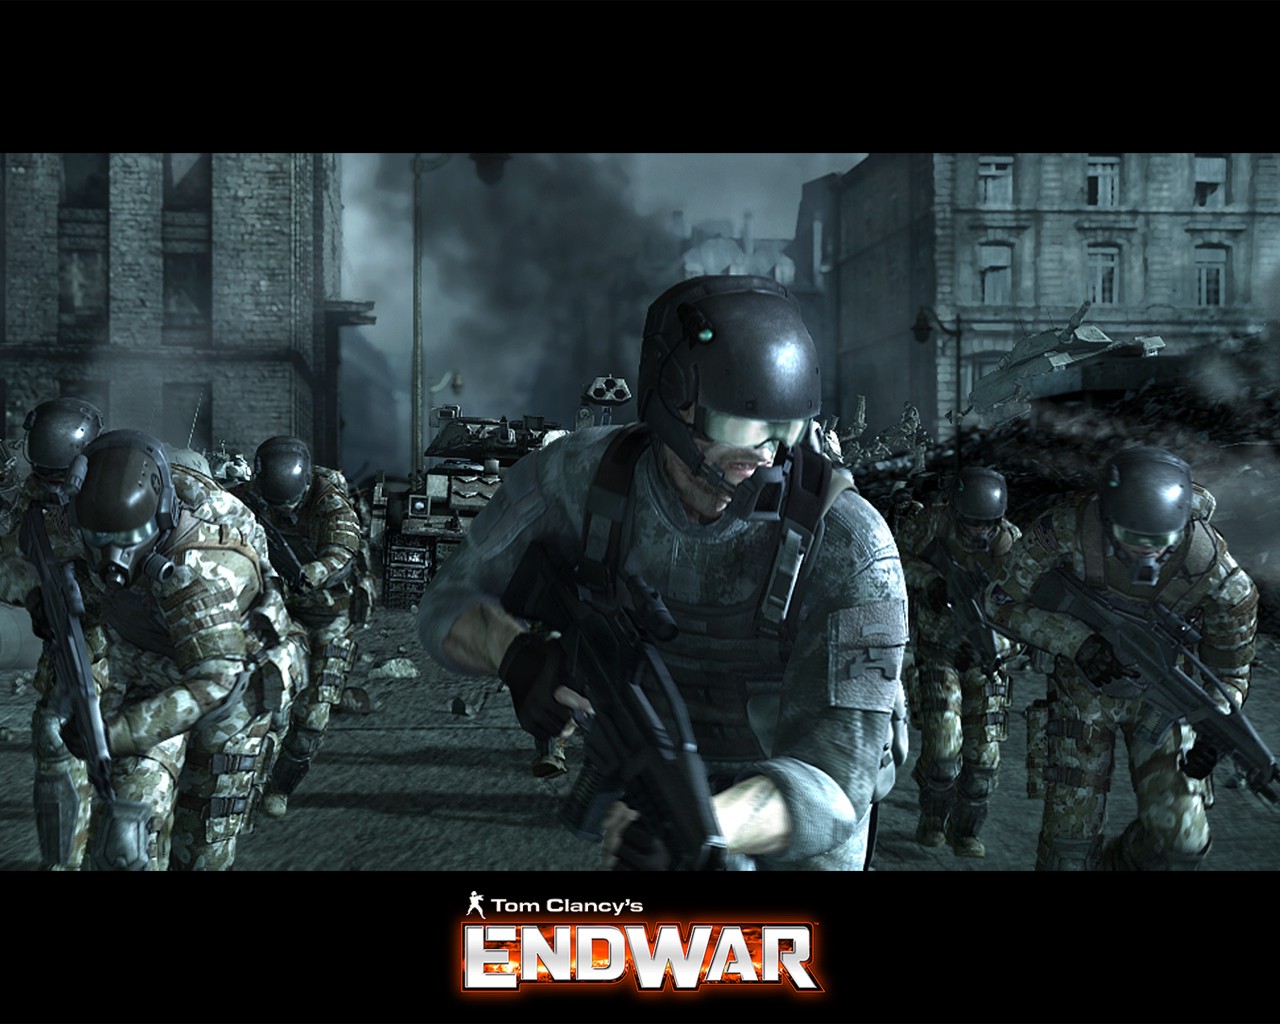 Download High quality Tom Clancy's End War wallpaper / Games / 1280x1024